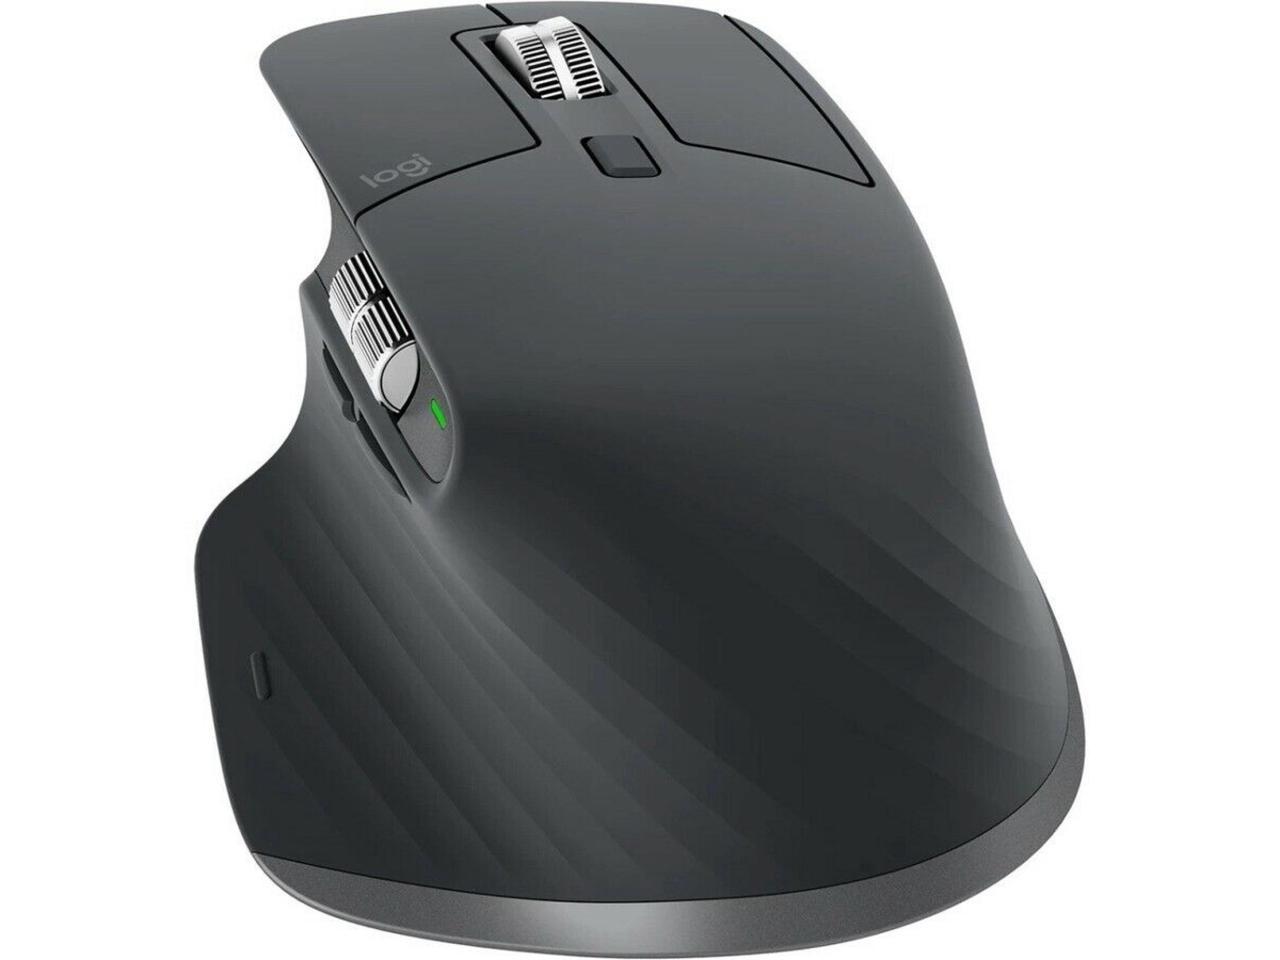 Logitech MX Master 3 for Business, Wireless Mouse, Logi Bolt Technology, Bluetooth, MagSpeed Scrolling, Rechargeable, Globally Certified, PC/Mac/Linux - Graphite - Newegg.com